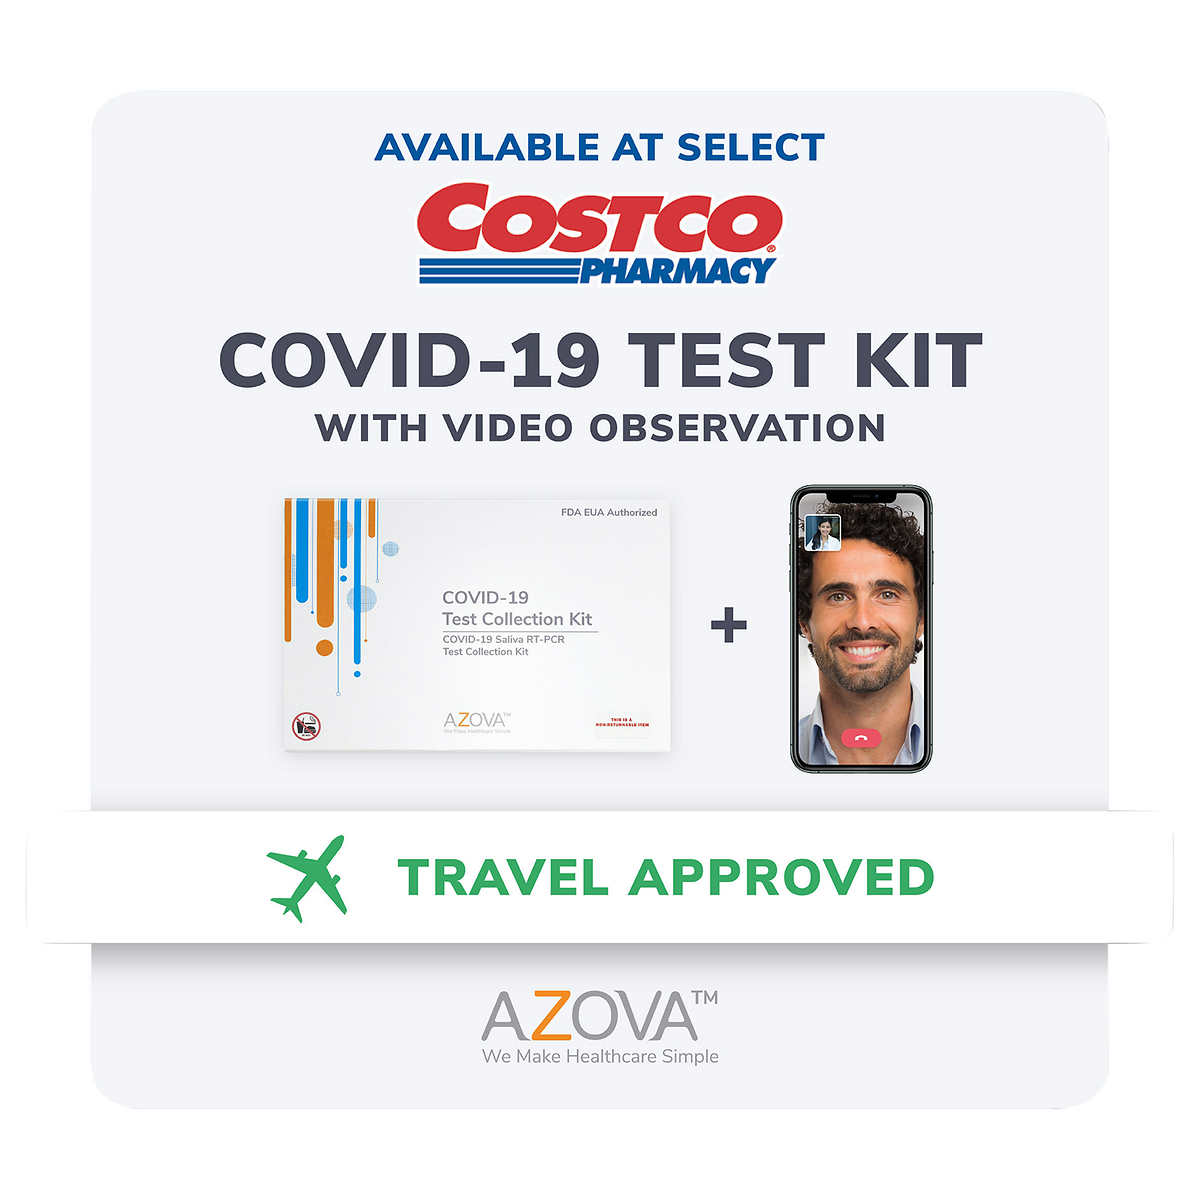 Covid-19 Saliva Pcr Test Kit With Video Observation For Travel By Azova Costco